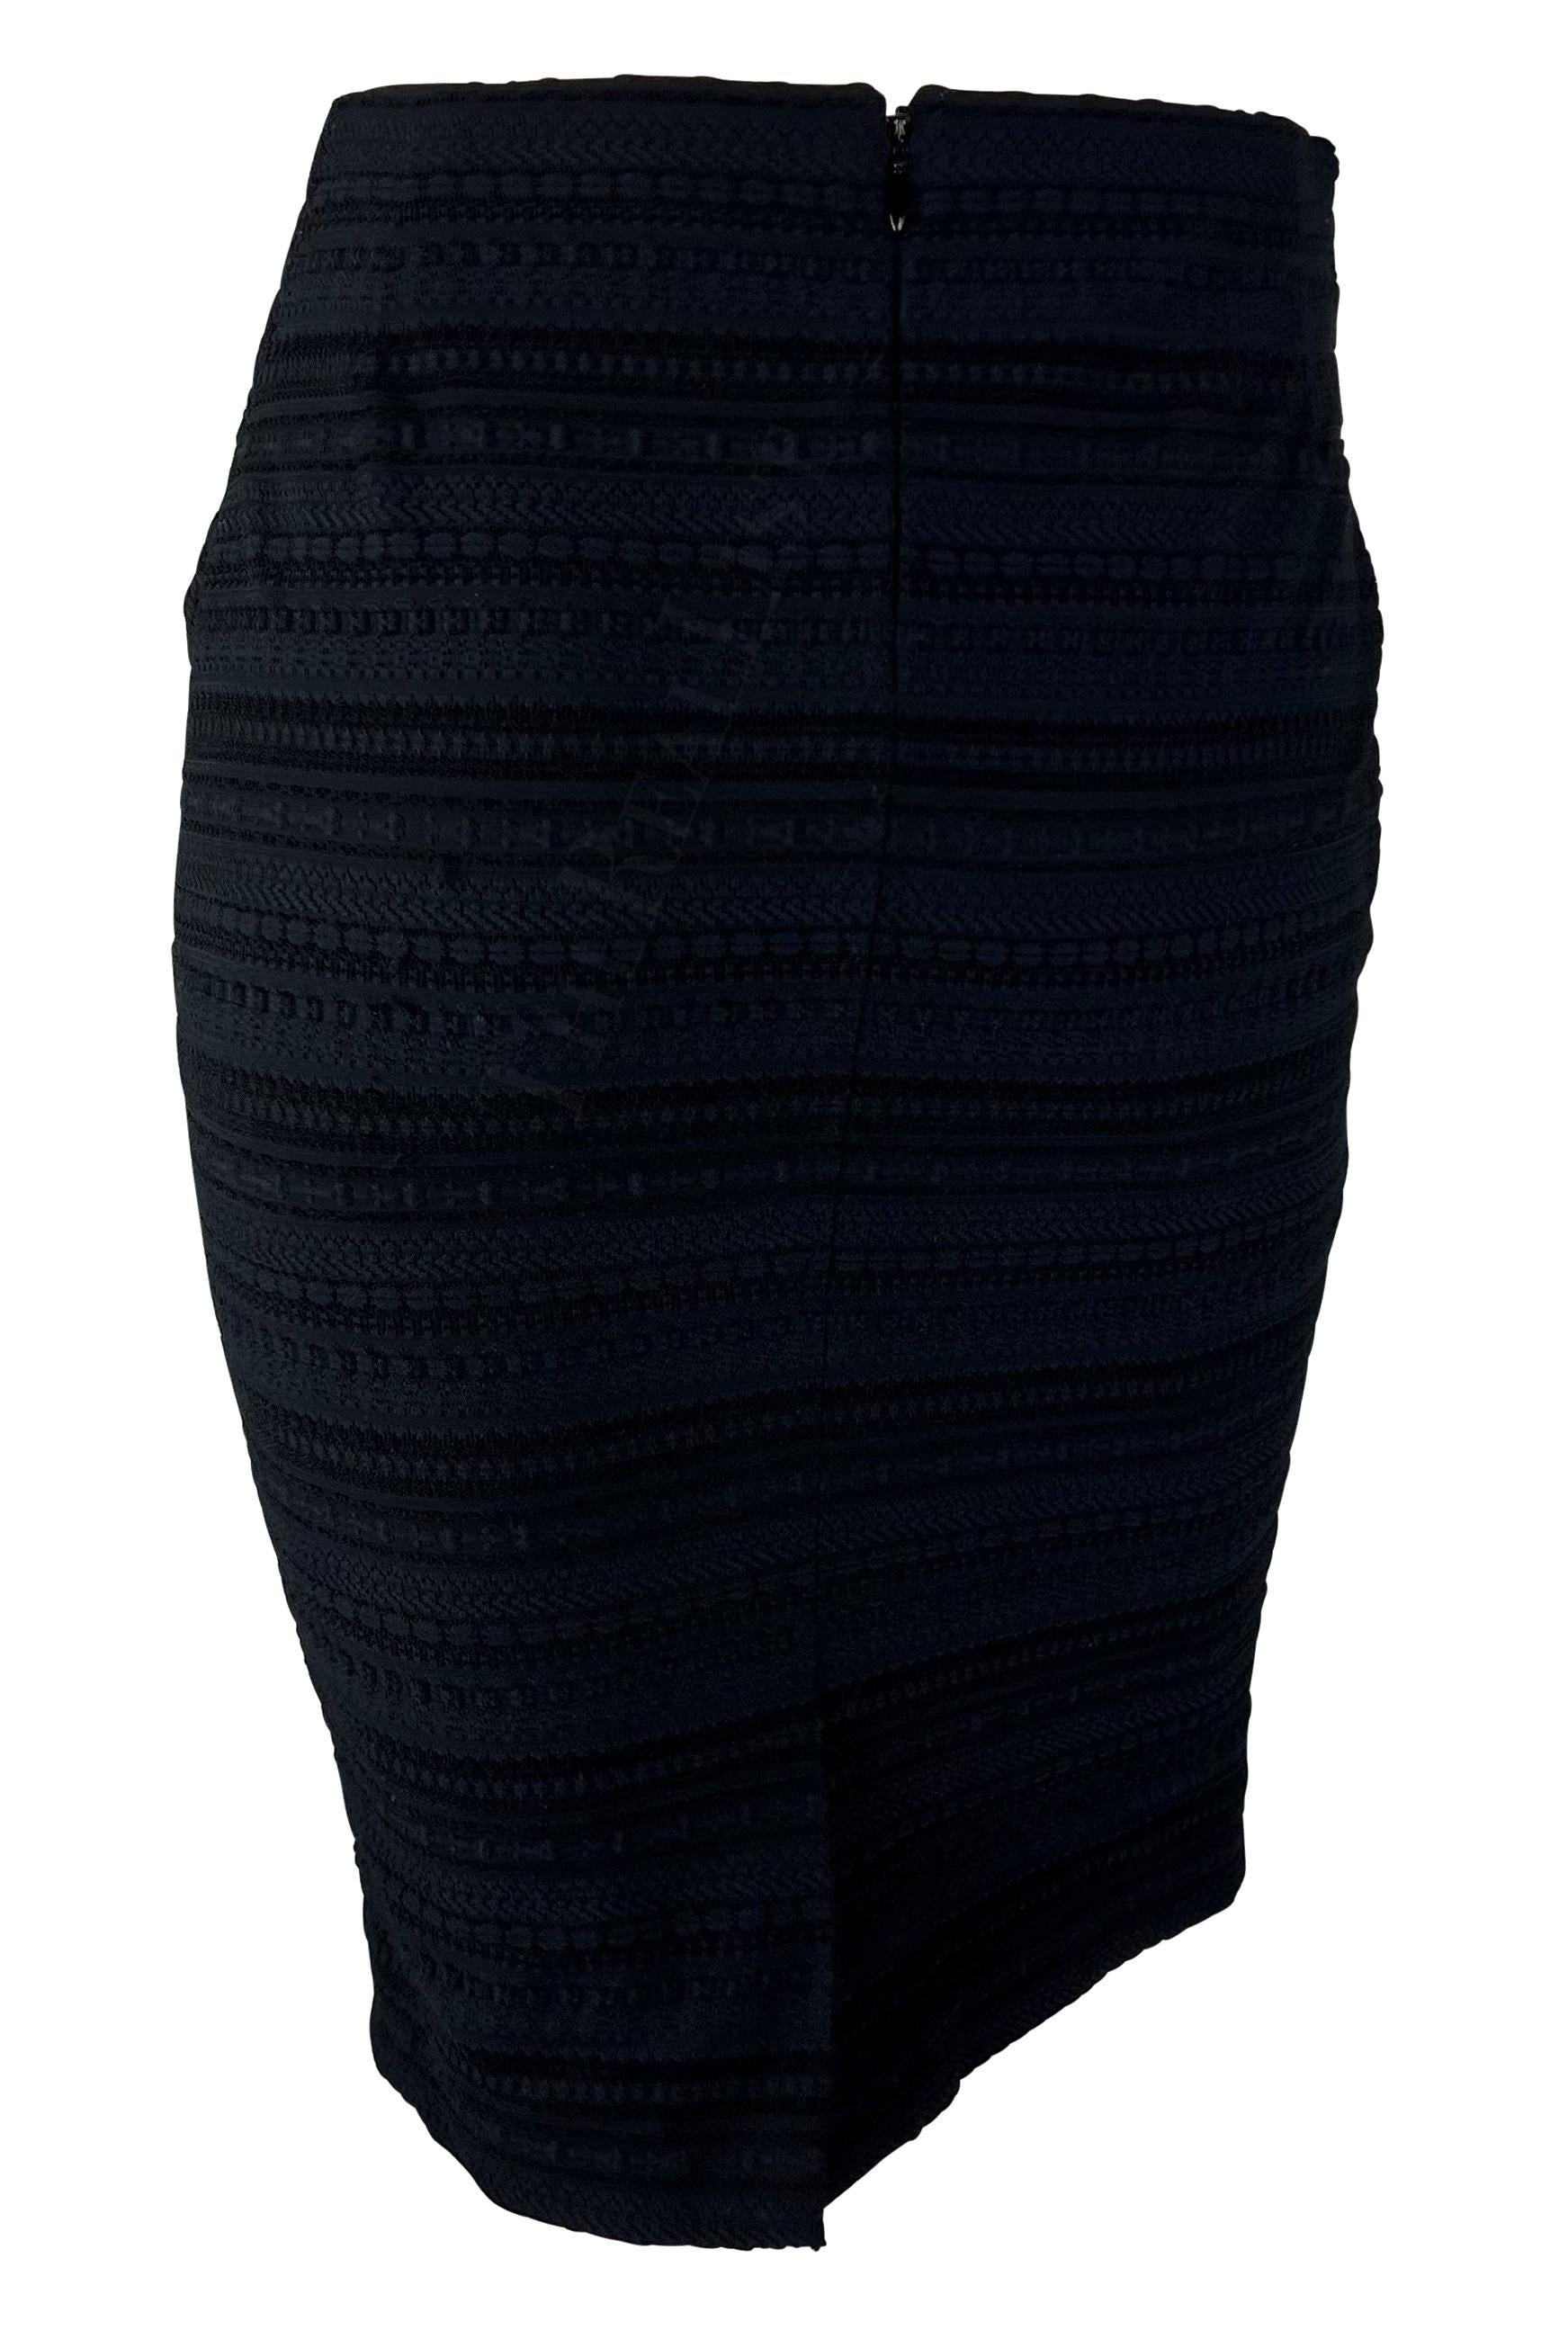 Women's Late 1990s Dolce & Gabbana Black Textured Knit Woven Bodycon Pencil Skirt For Sale